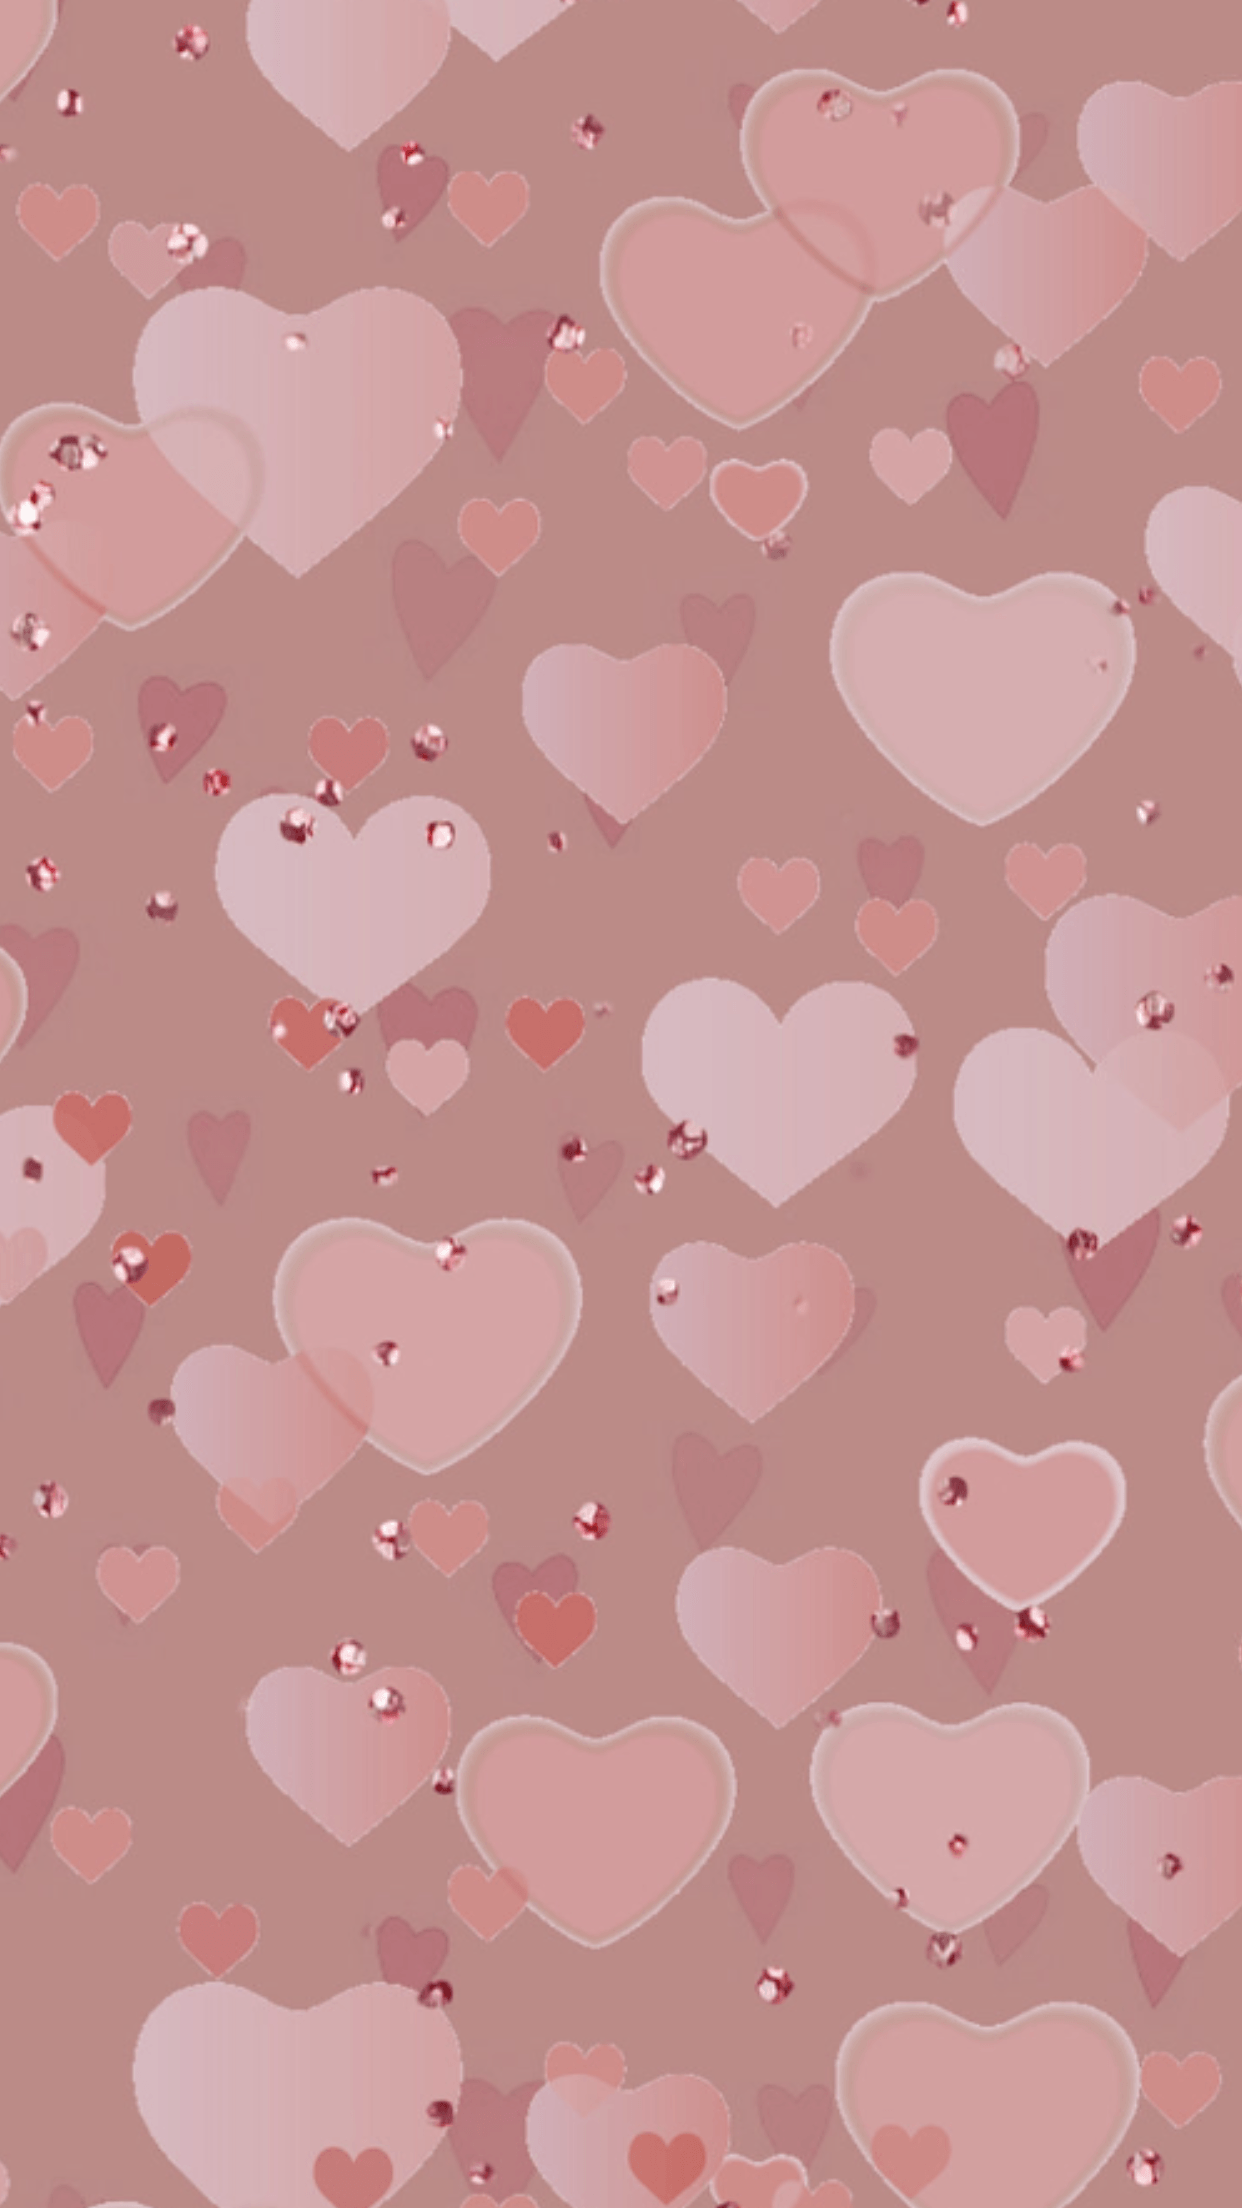 A pink and red heart wallpaper - Pink heart